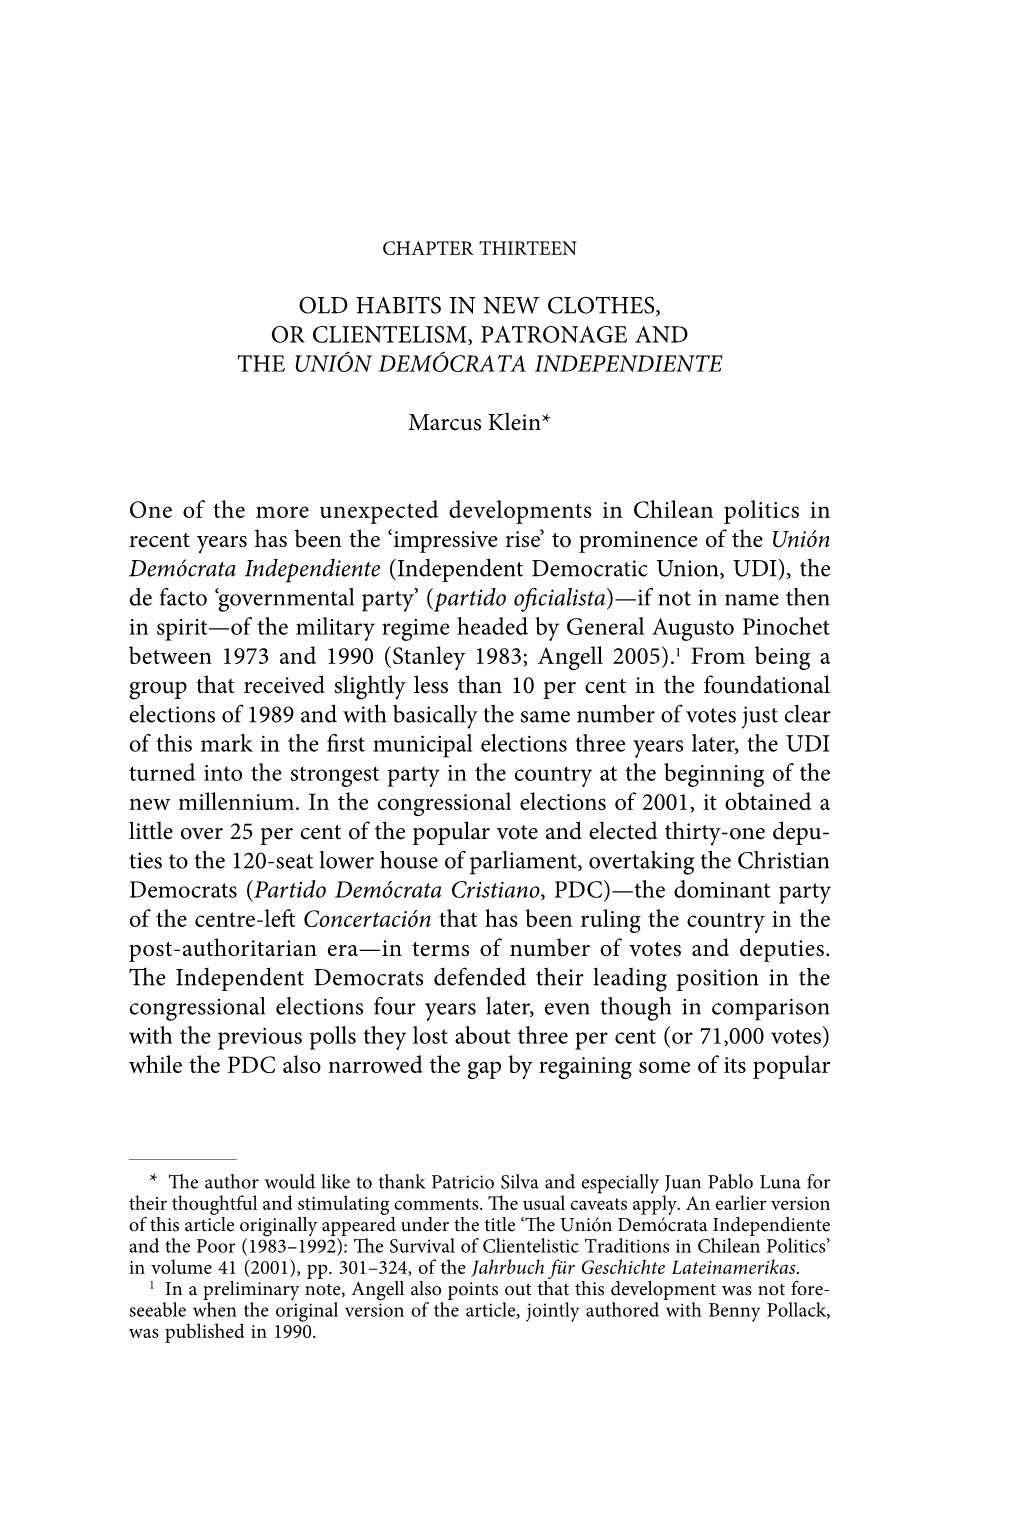 Old Habits in New Clothes, Or Clientelism, Patronage and the Unión Demócrata Independiente